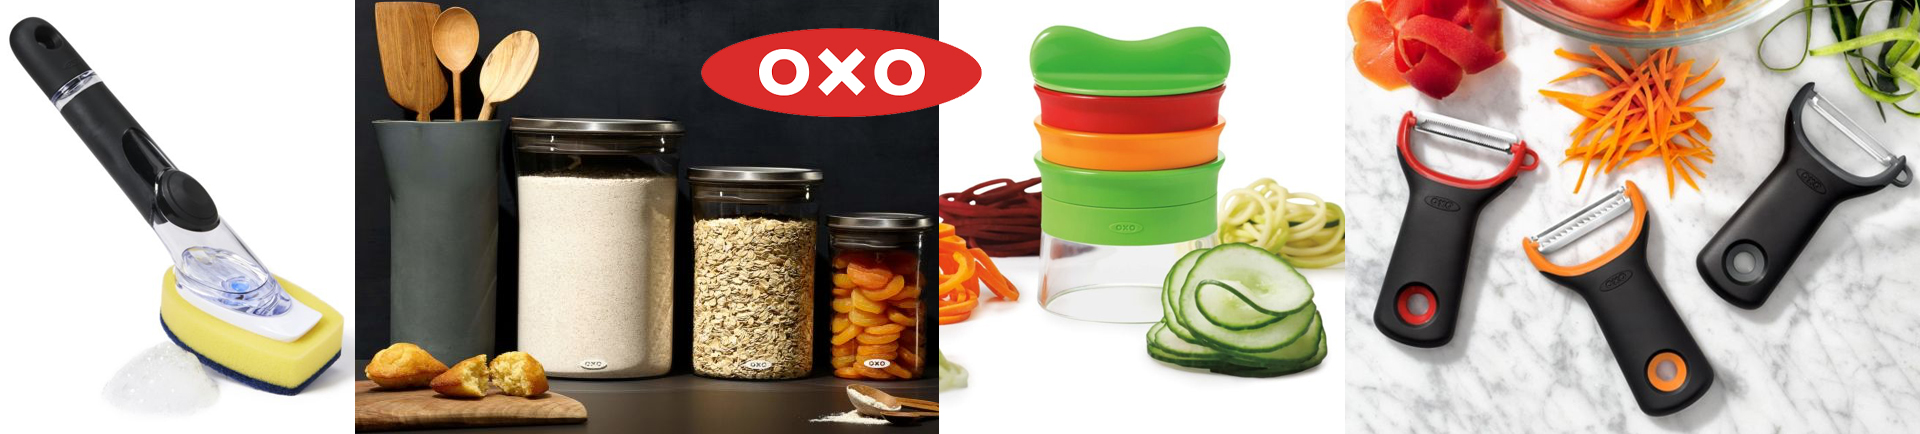 OXO Products Banner